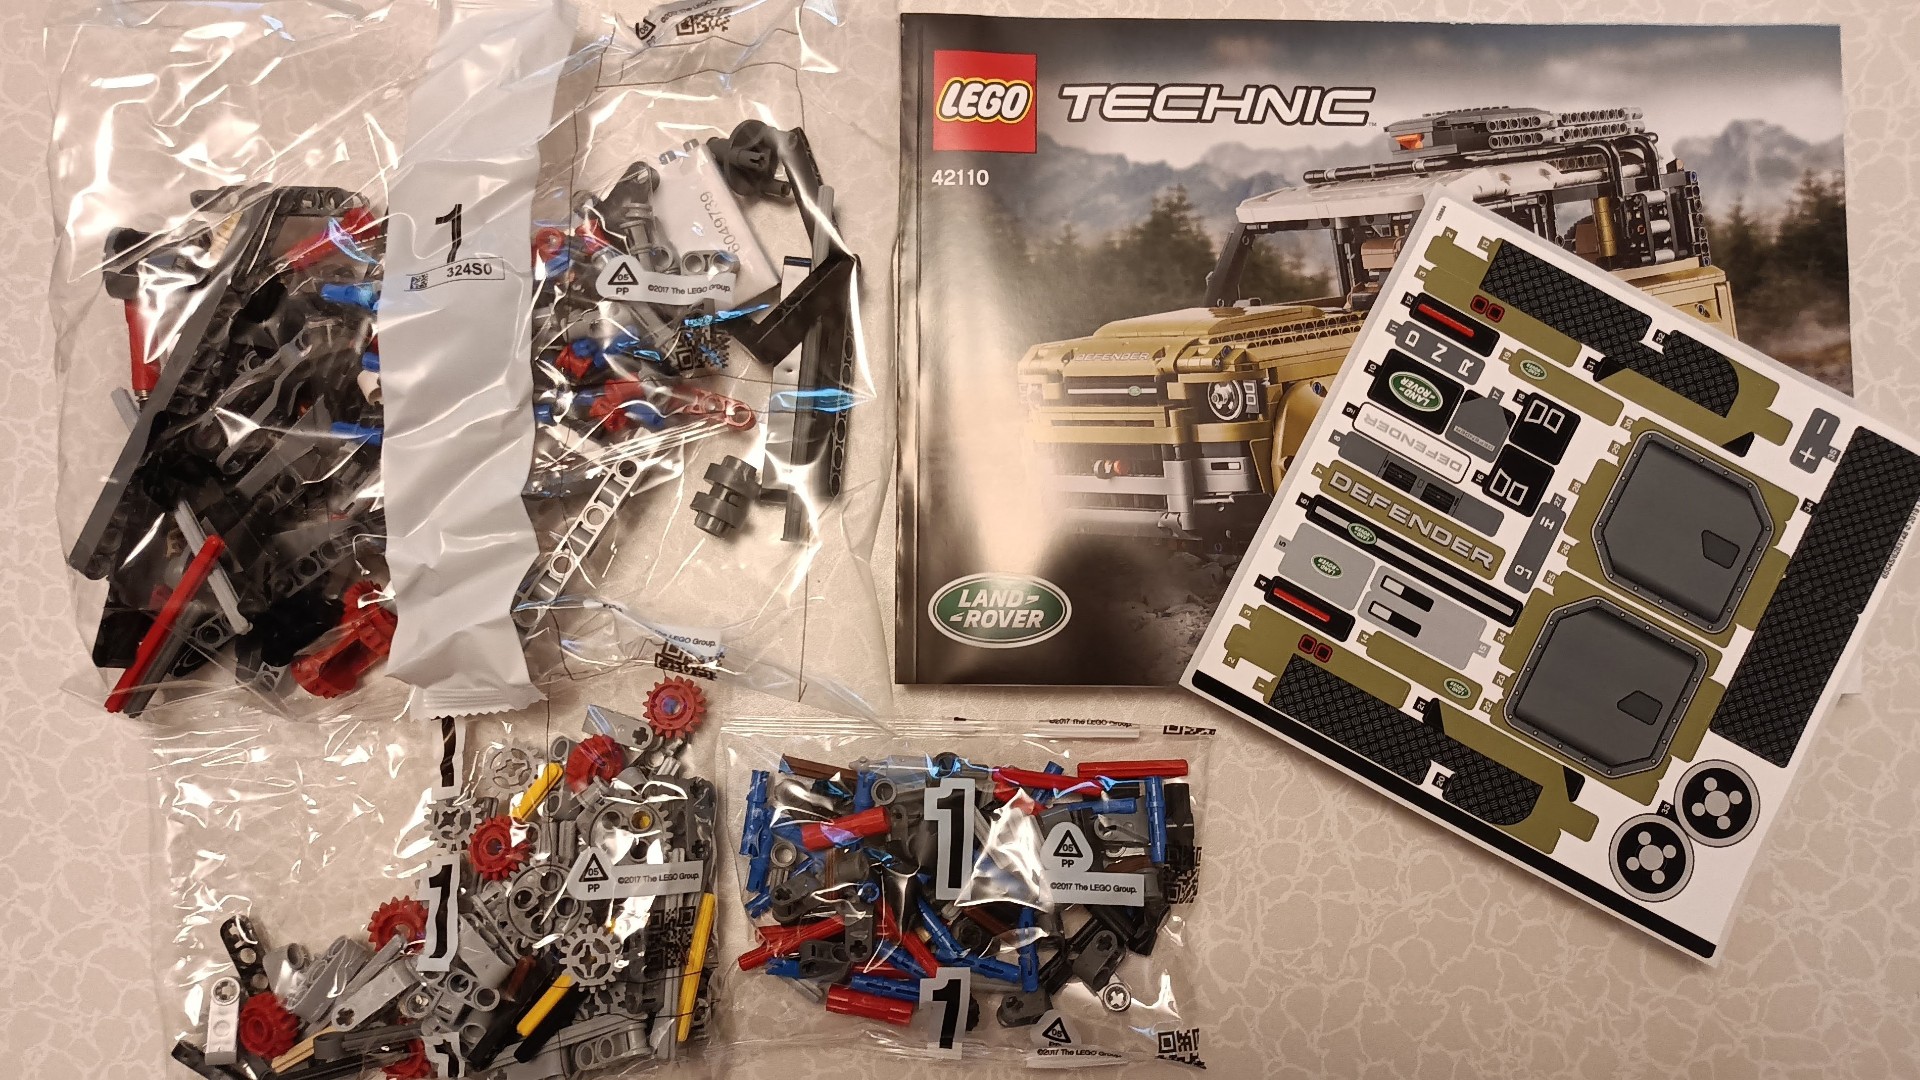 Lego Technic Land Rover Defender 42110 - instruction book and some bag 1s.